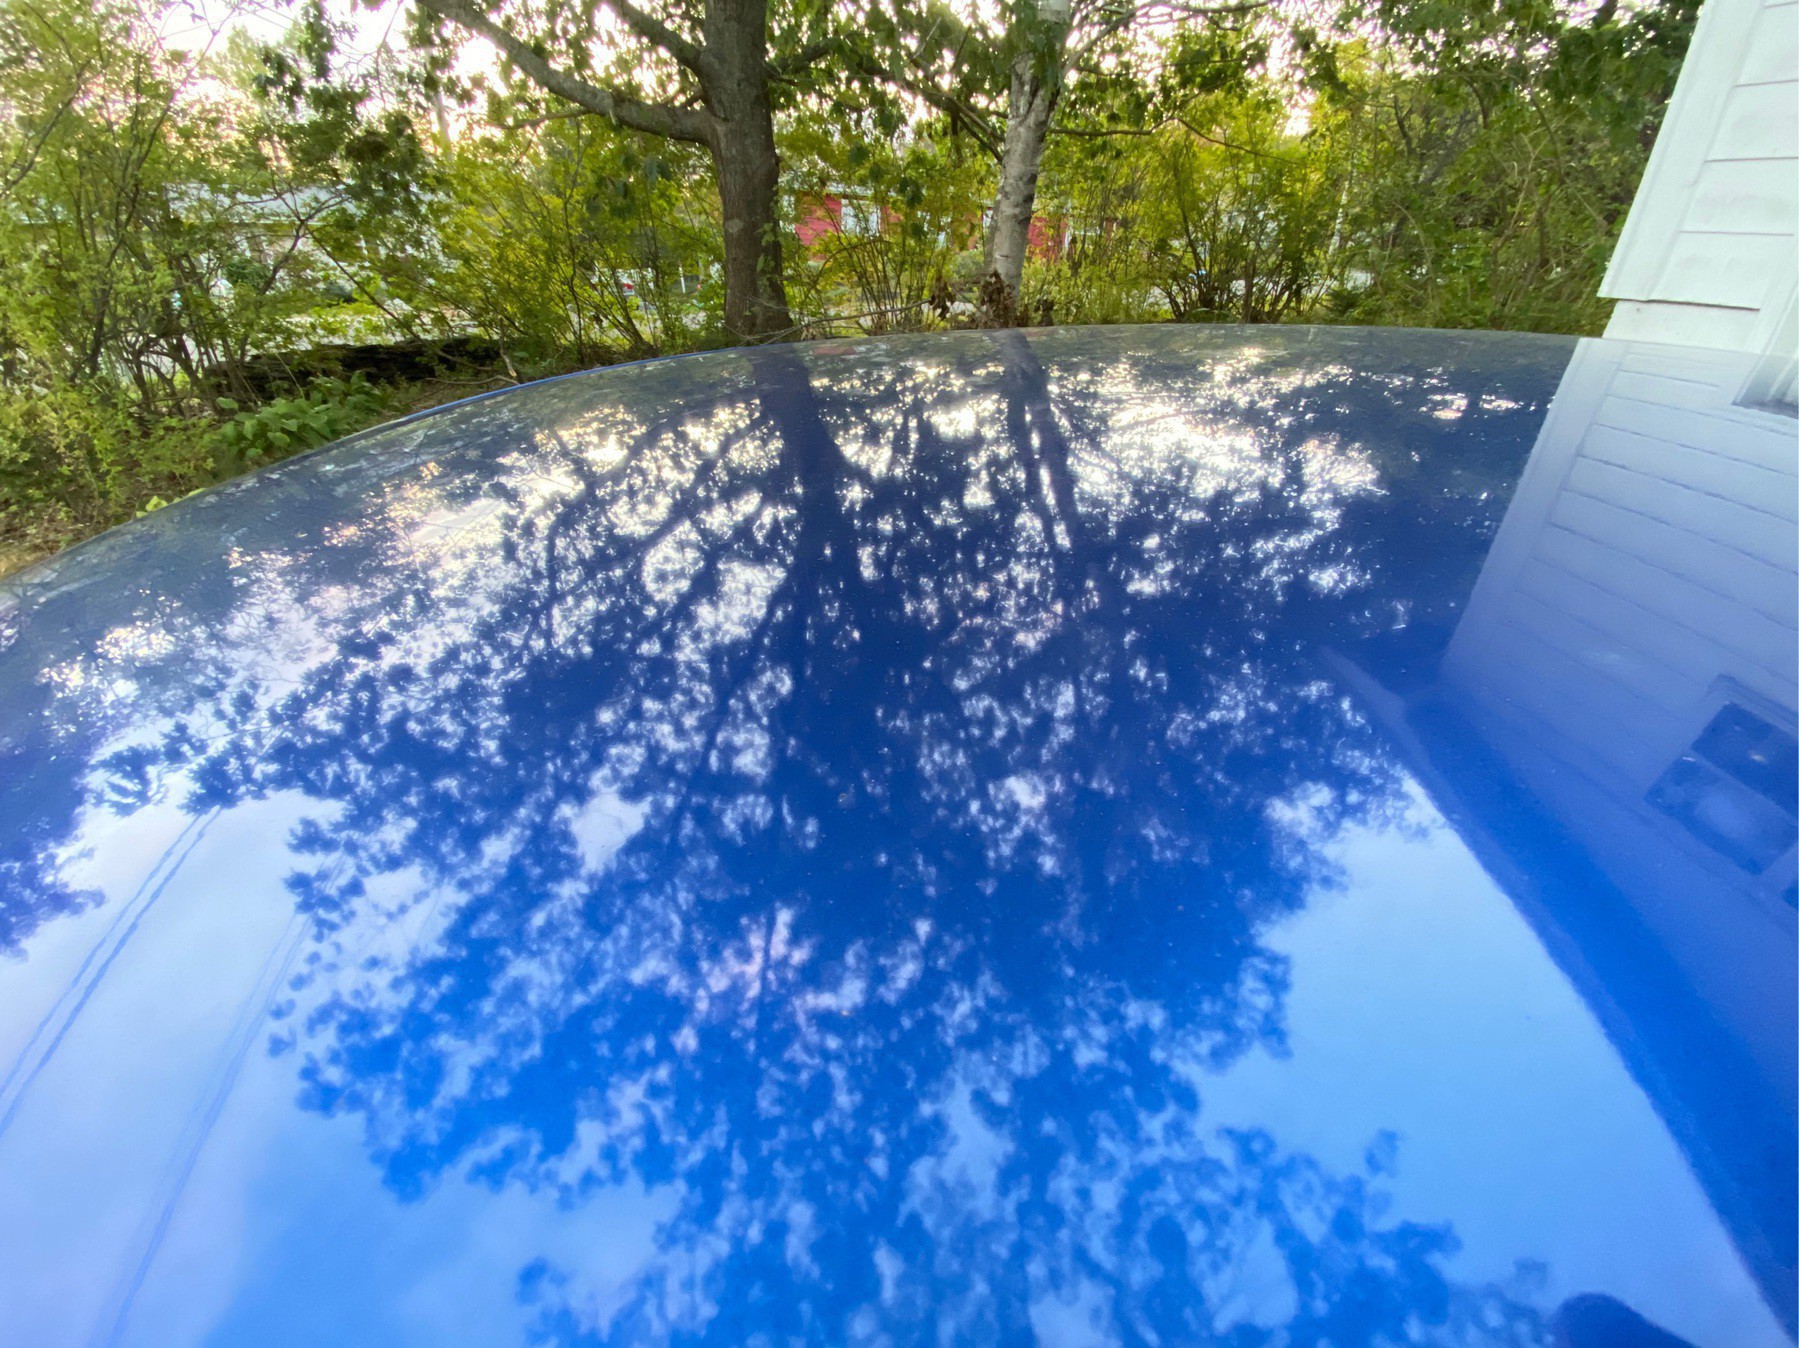 Tree reflected in car roof.